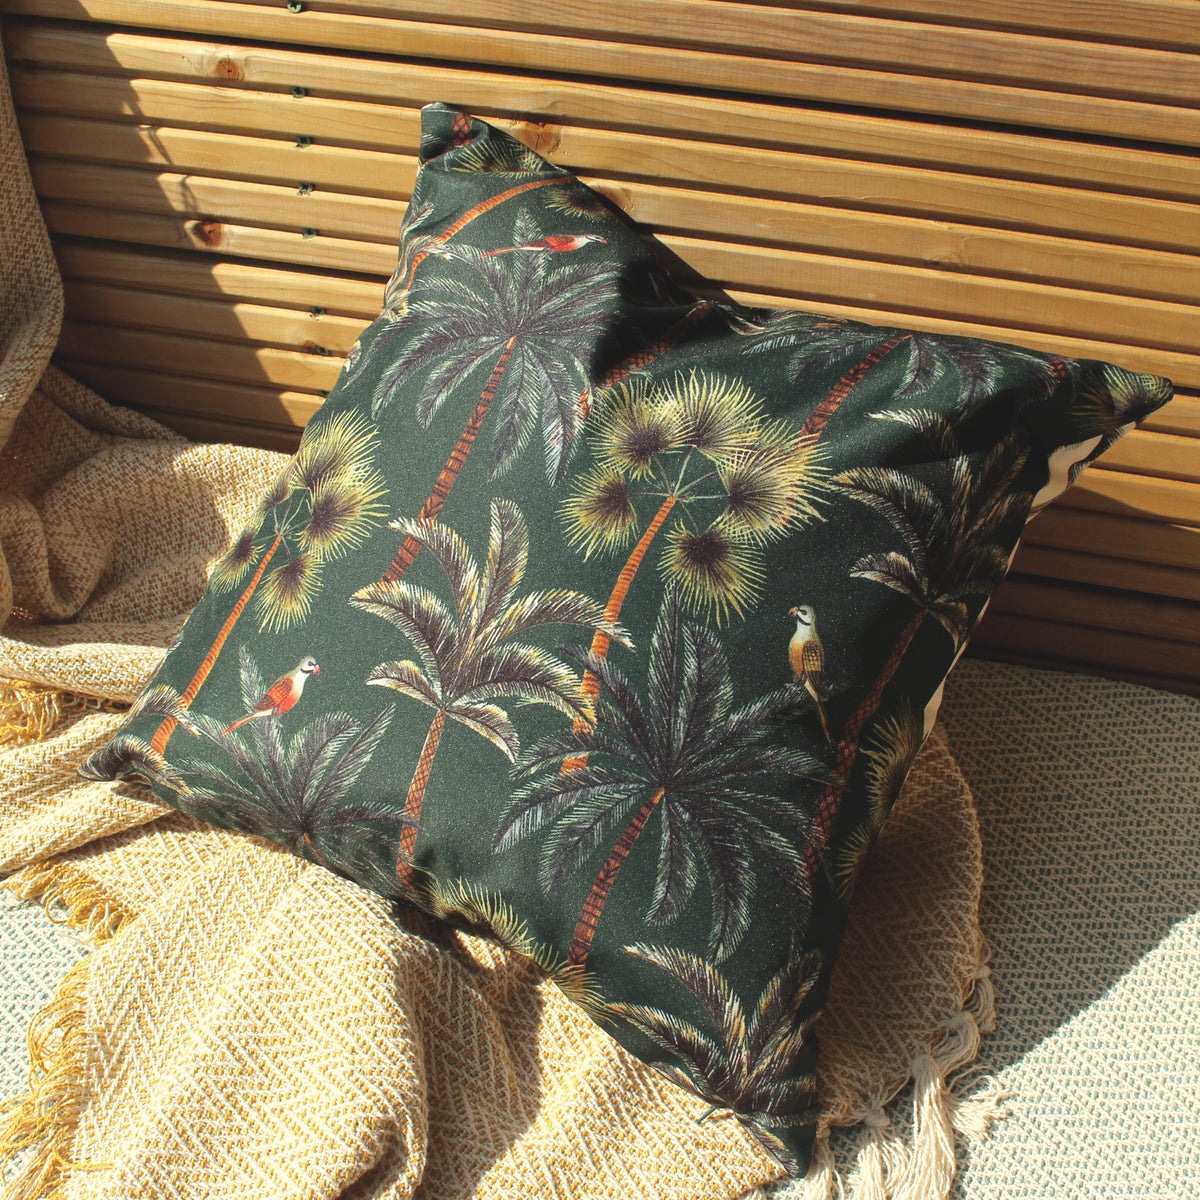 Palms 43cm Reversible Outdoor Polyester Cushion